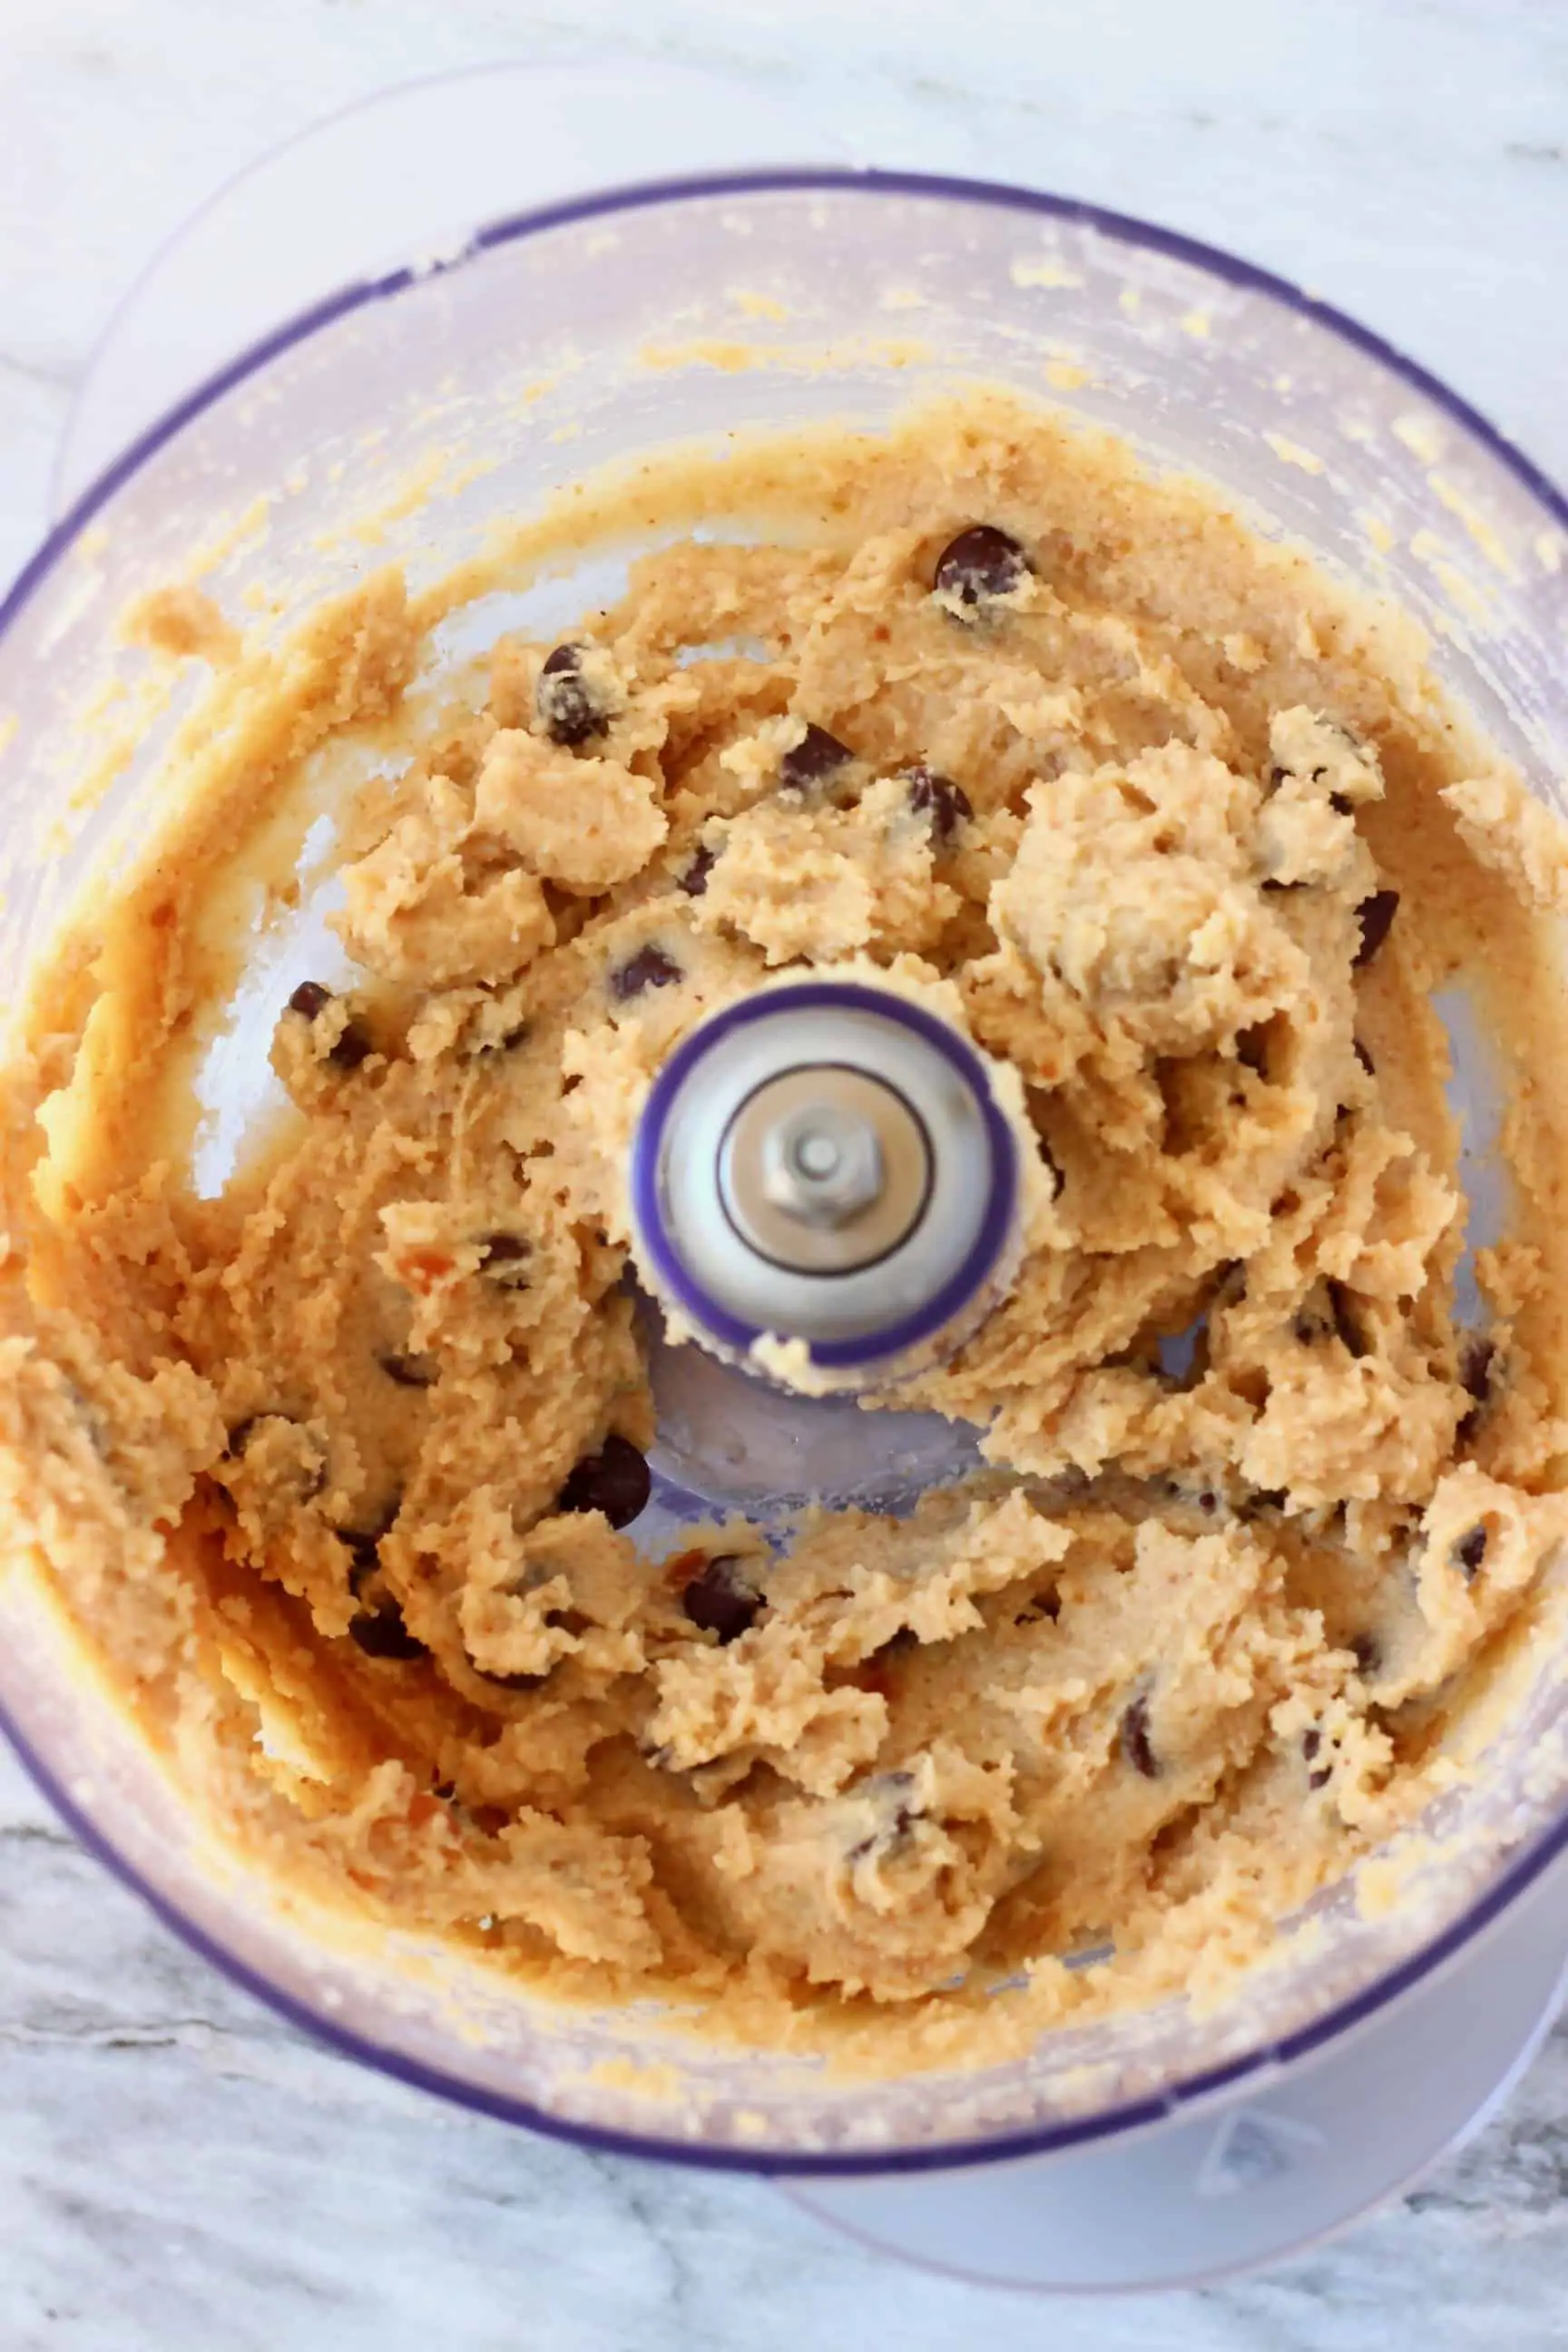 Vegan cookie dough with chocolate chips in a food processor against a marble background